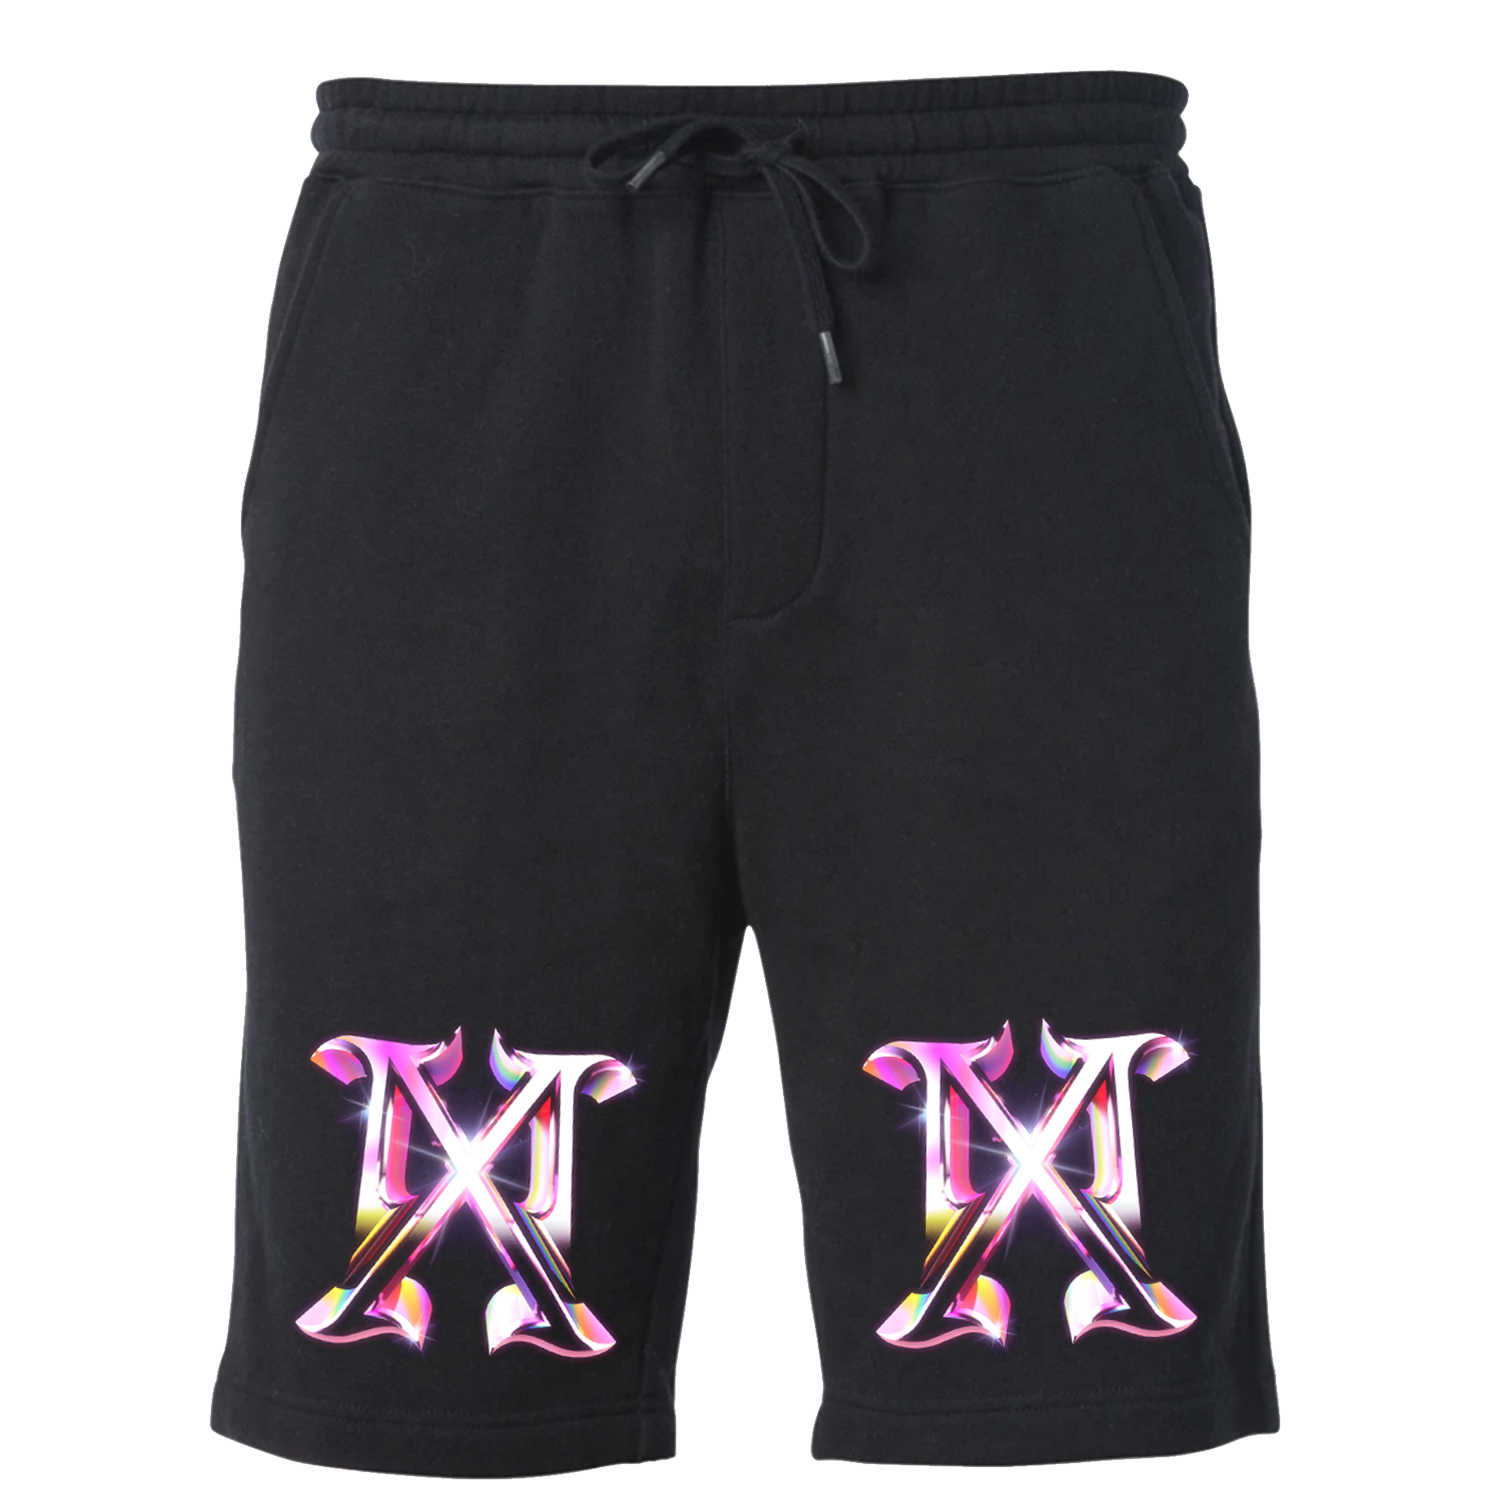 Madame X Spectral Shorts